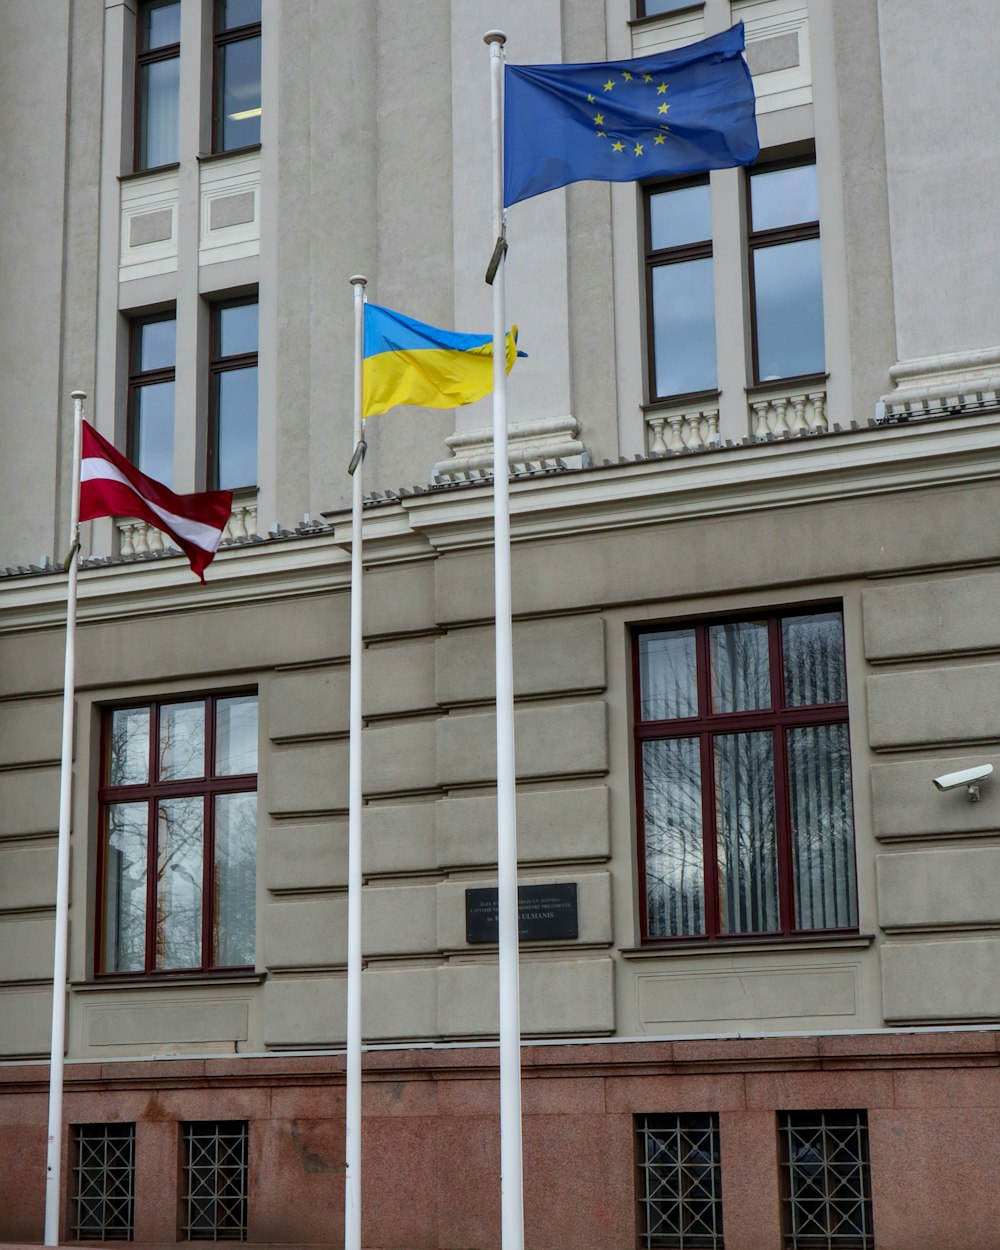 three flags are flying in front of a building